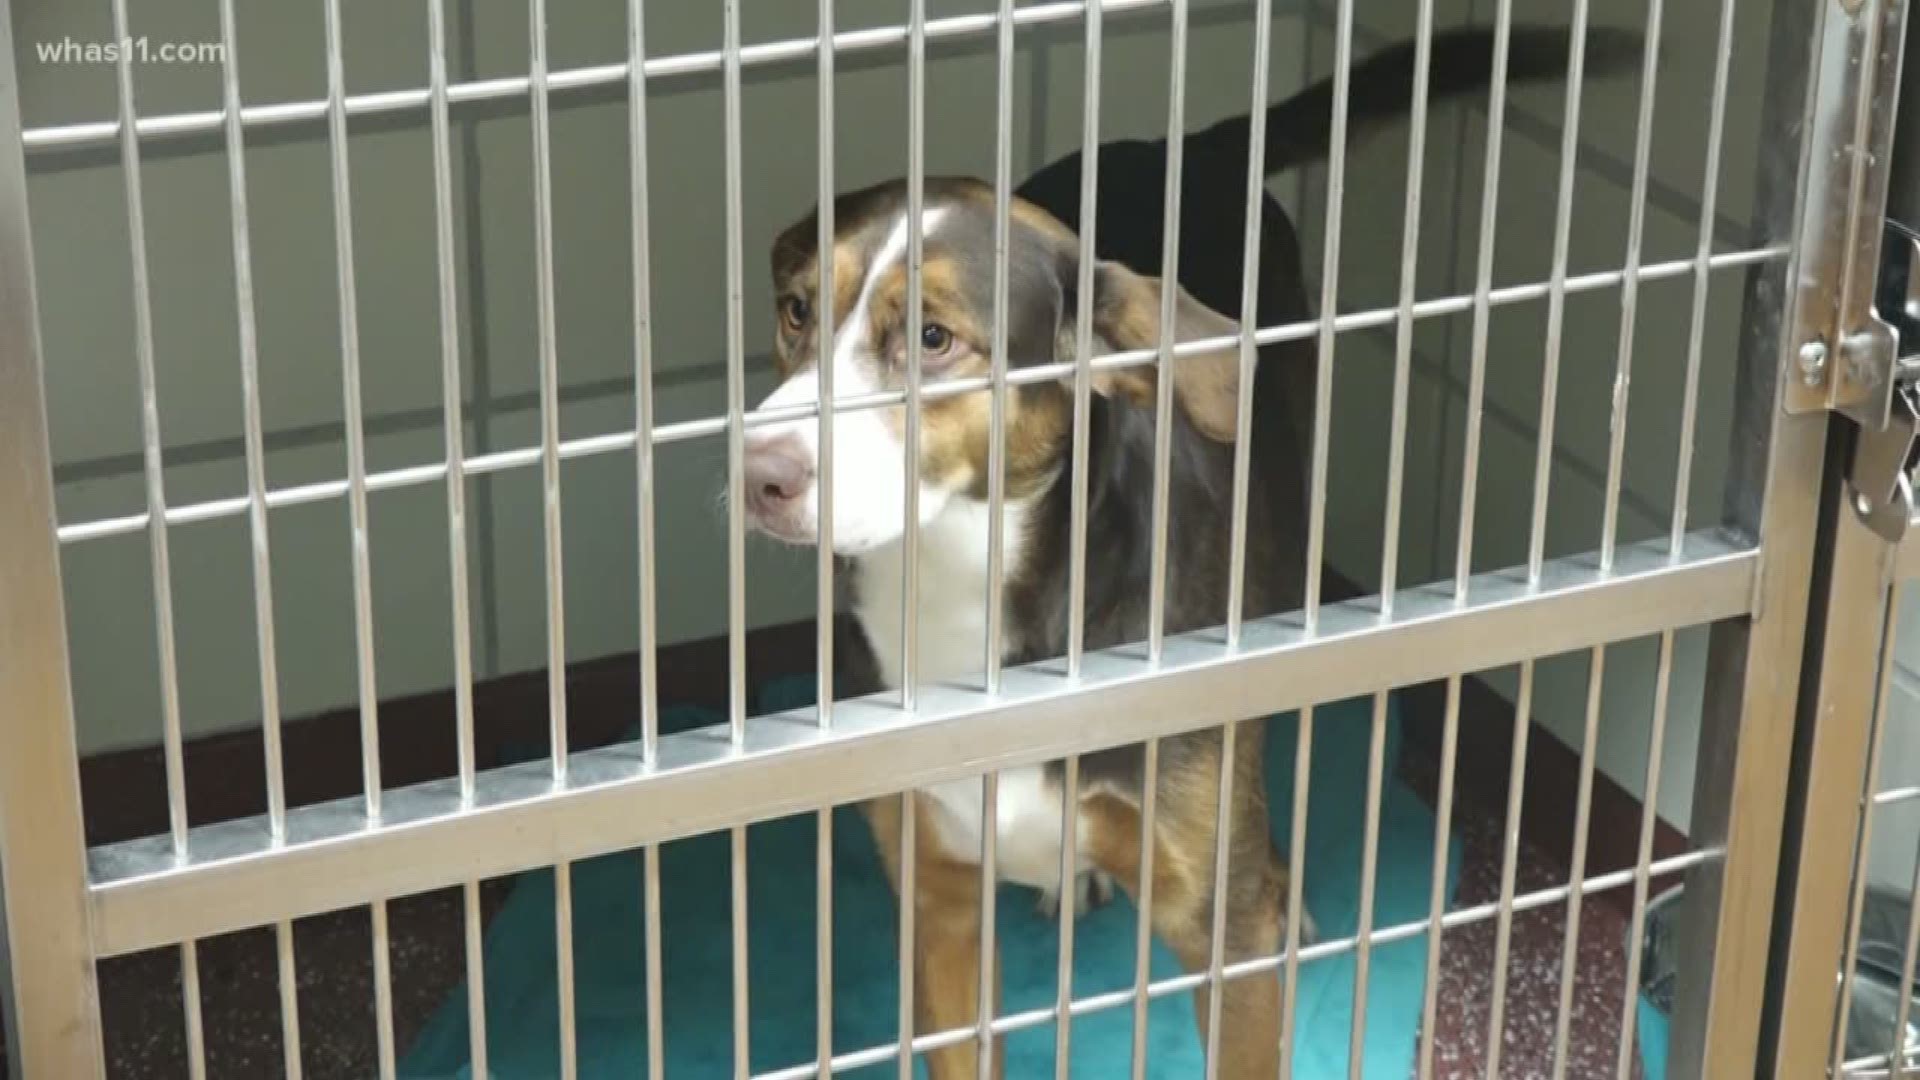 Members of Metro Council's public safety committee are scheduled to discuss an ordinance that would require animal abusers to register in an online database.